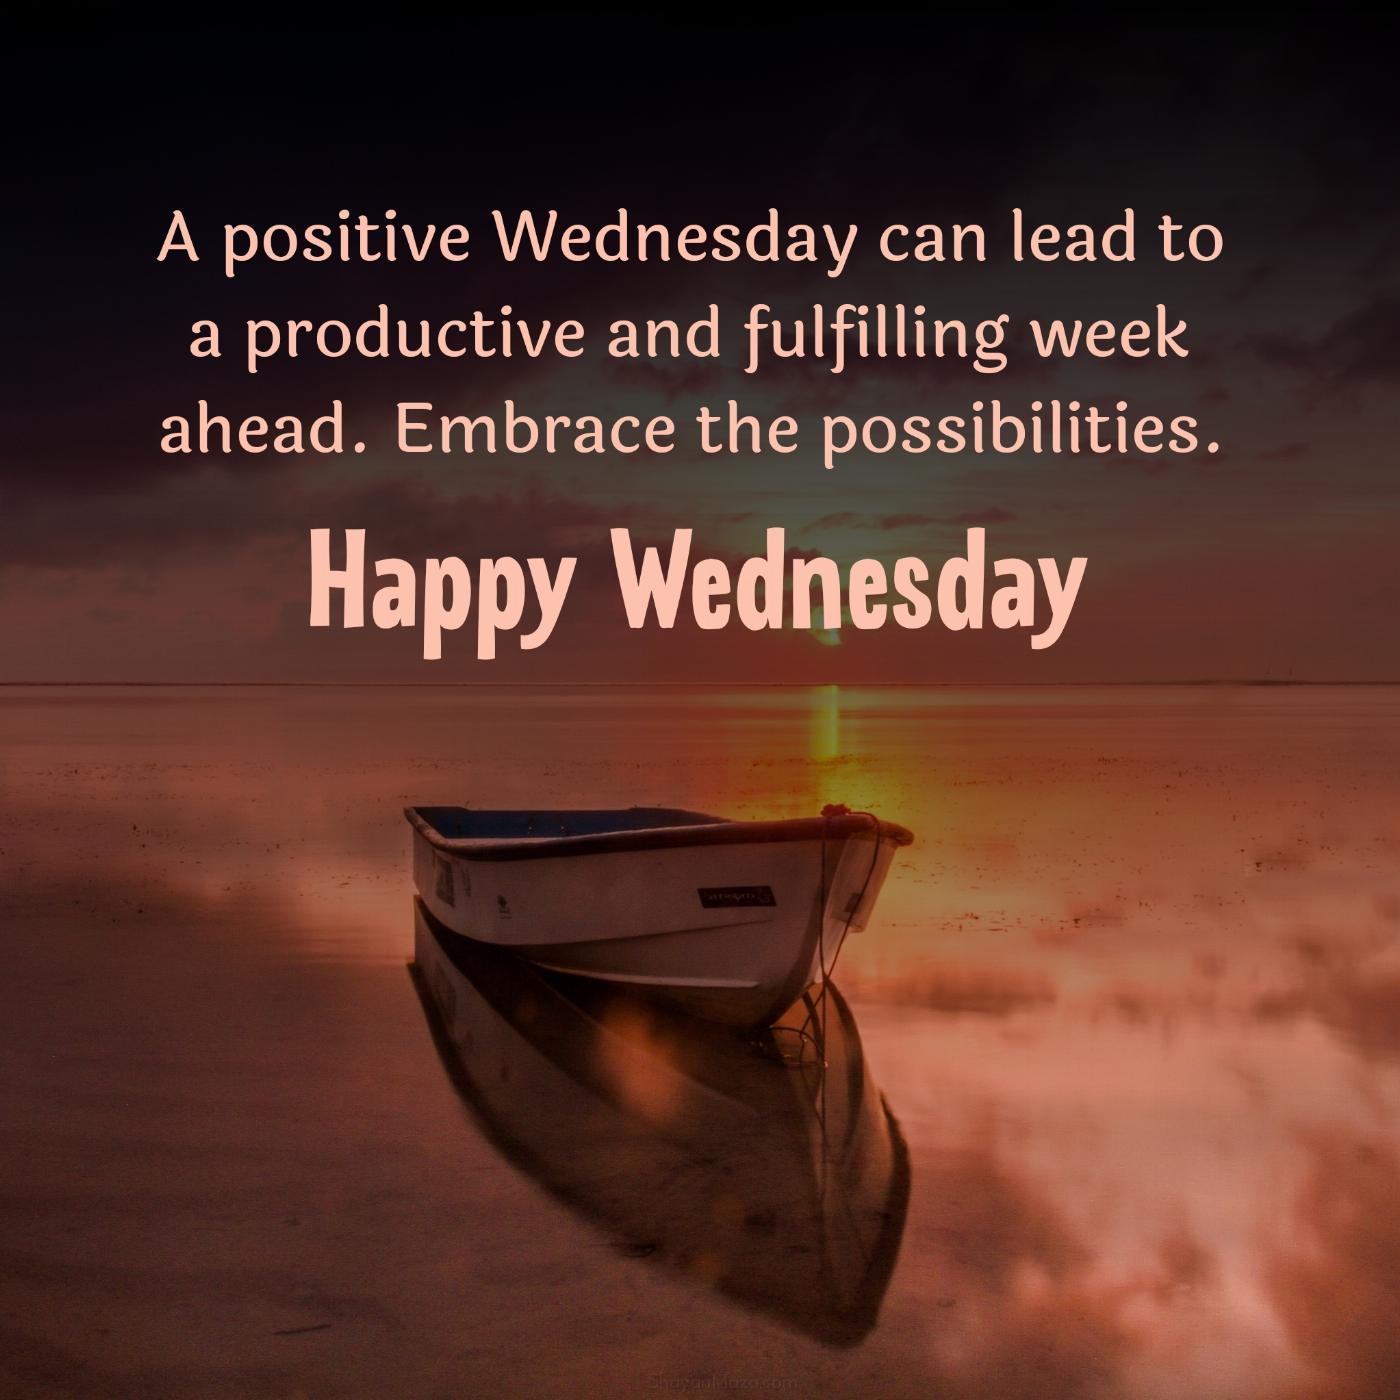 A positive Wednesday can lead to a productive and fulfilling week